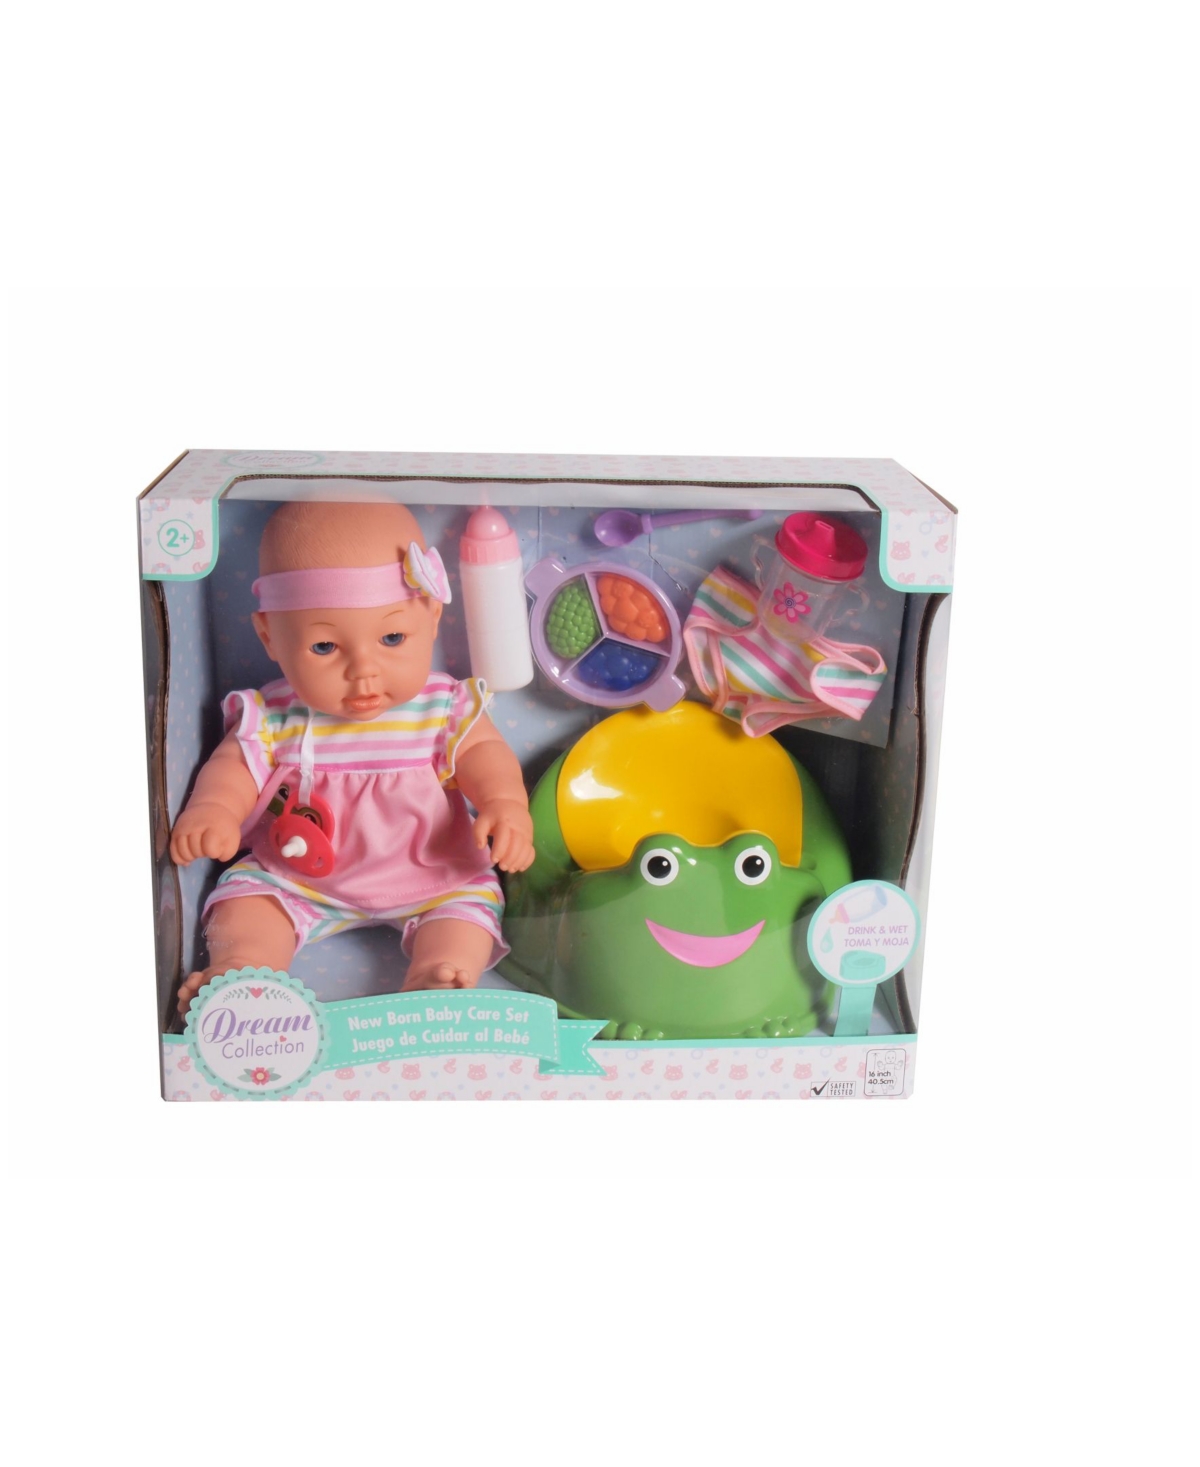 Redbox Dream Collection 16" Pretend Play Baby Doll Care Set With Potty Accessories In Multi